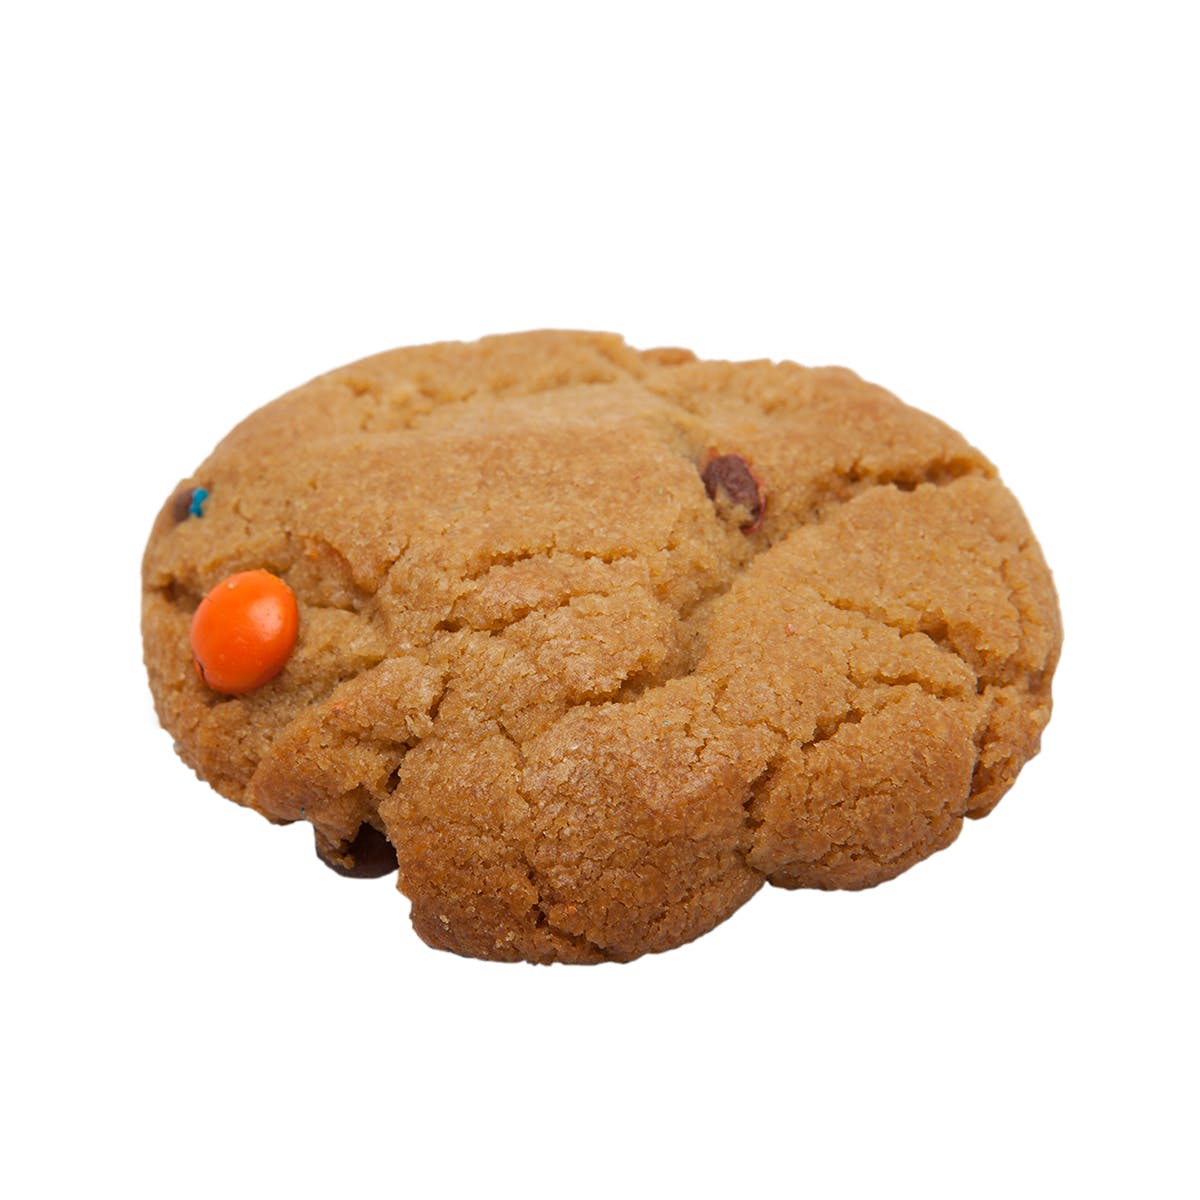 edible-goodies-by-magooch-peanut-butter-mams-cookie-120-mg-thc